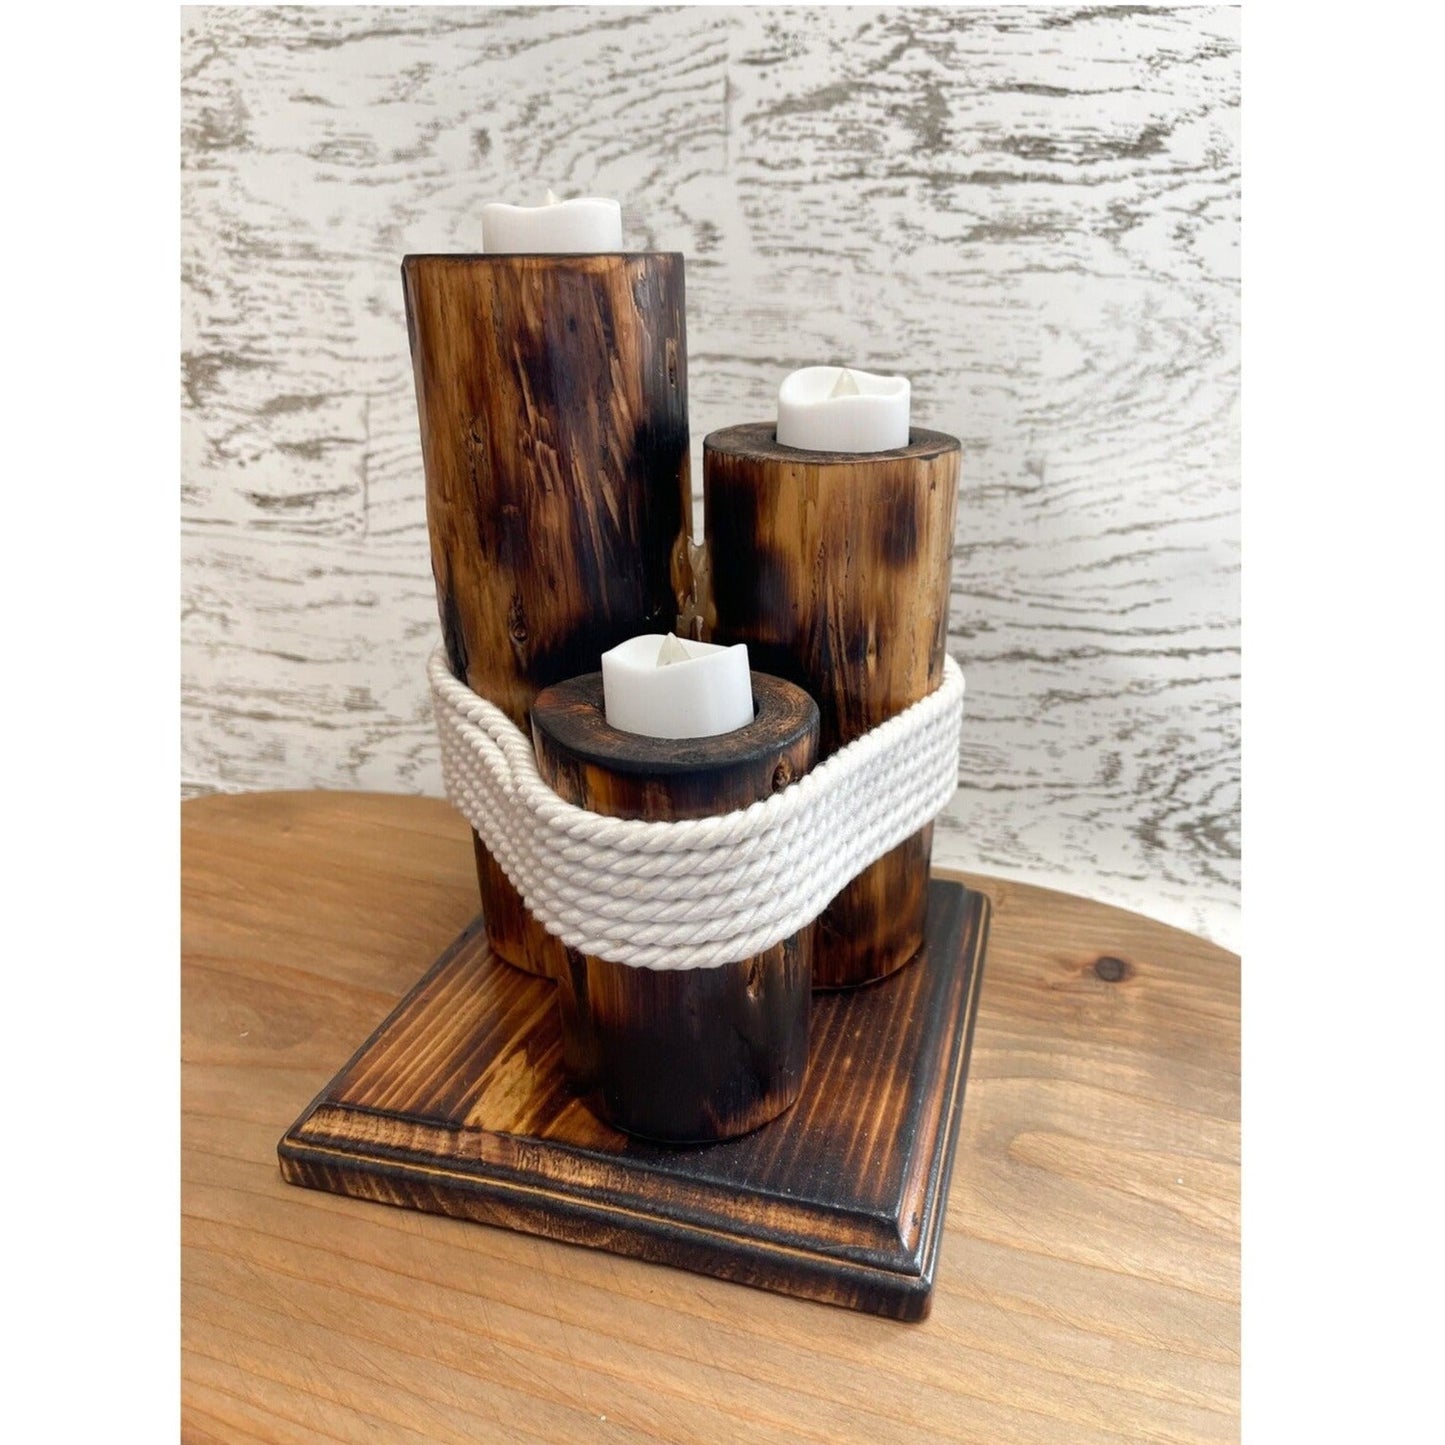 Rustic Lodgepole Candle Holder